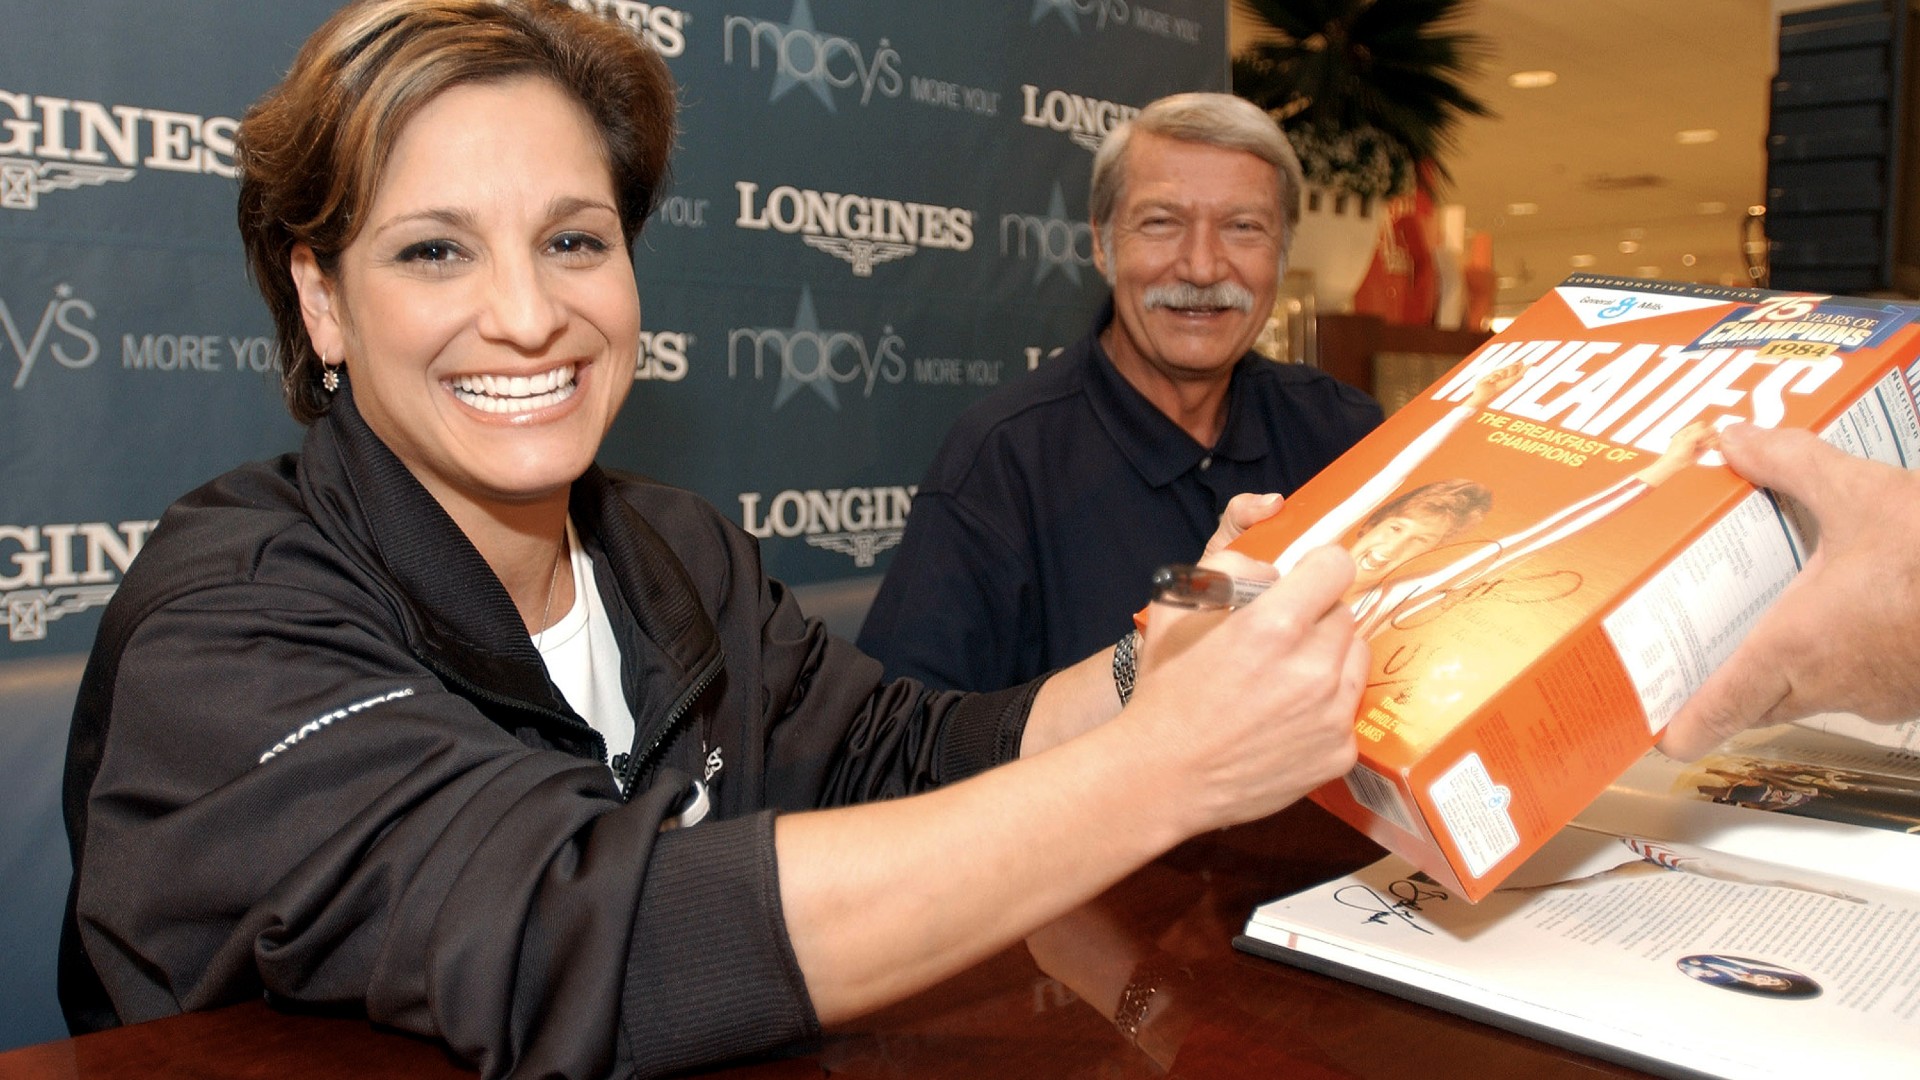 Mary Lou Retton’s daughter provides update on her mother’s health struggle.